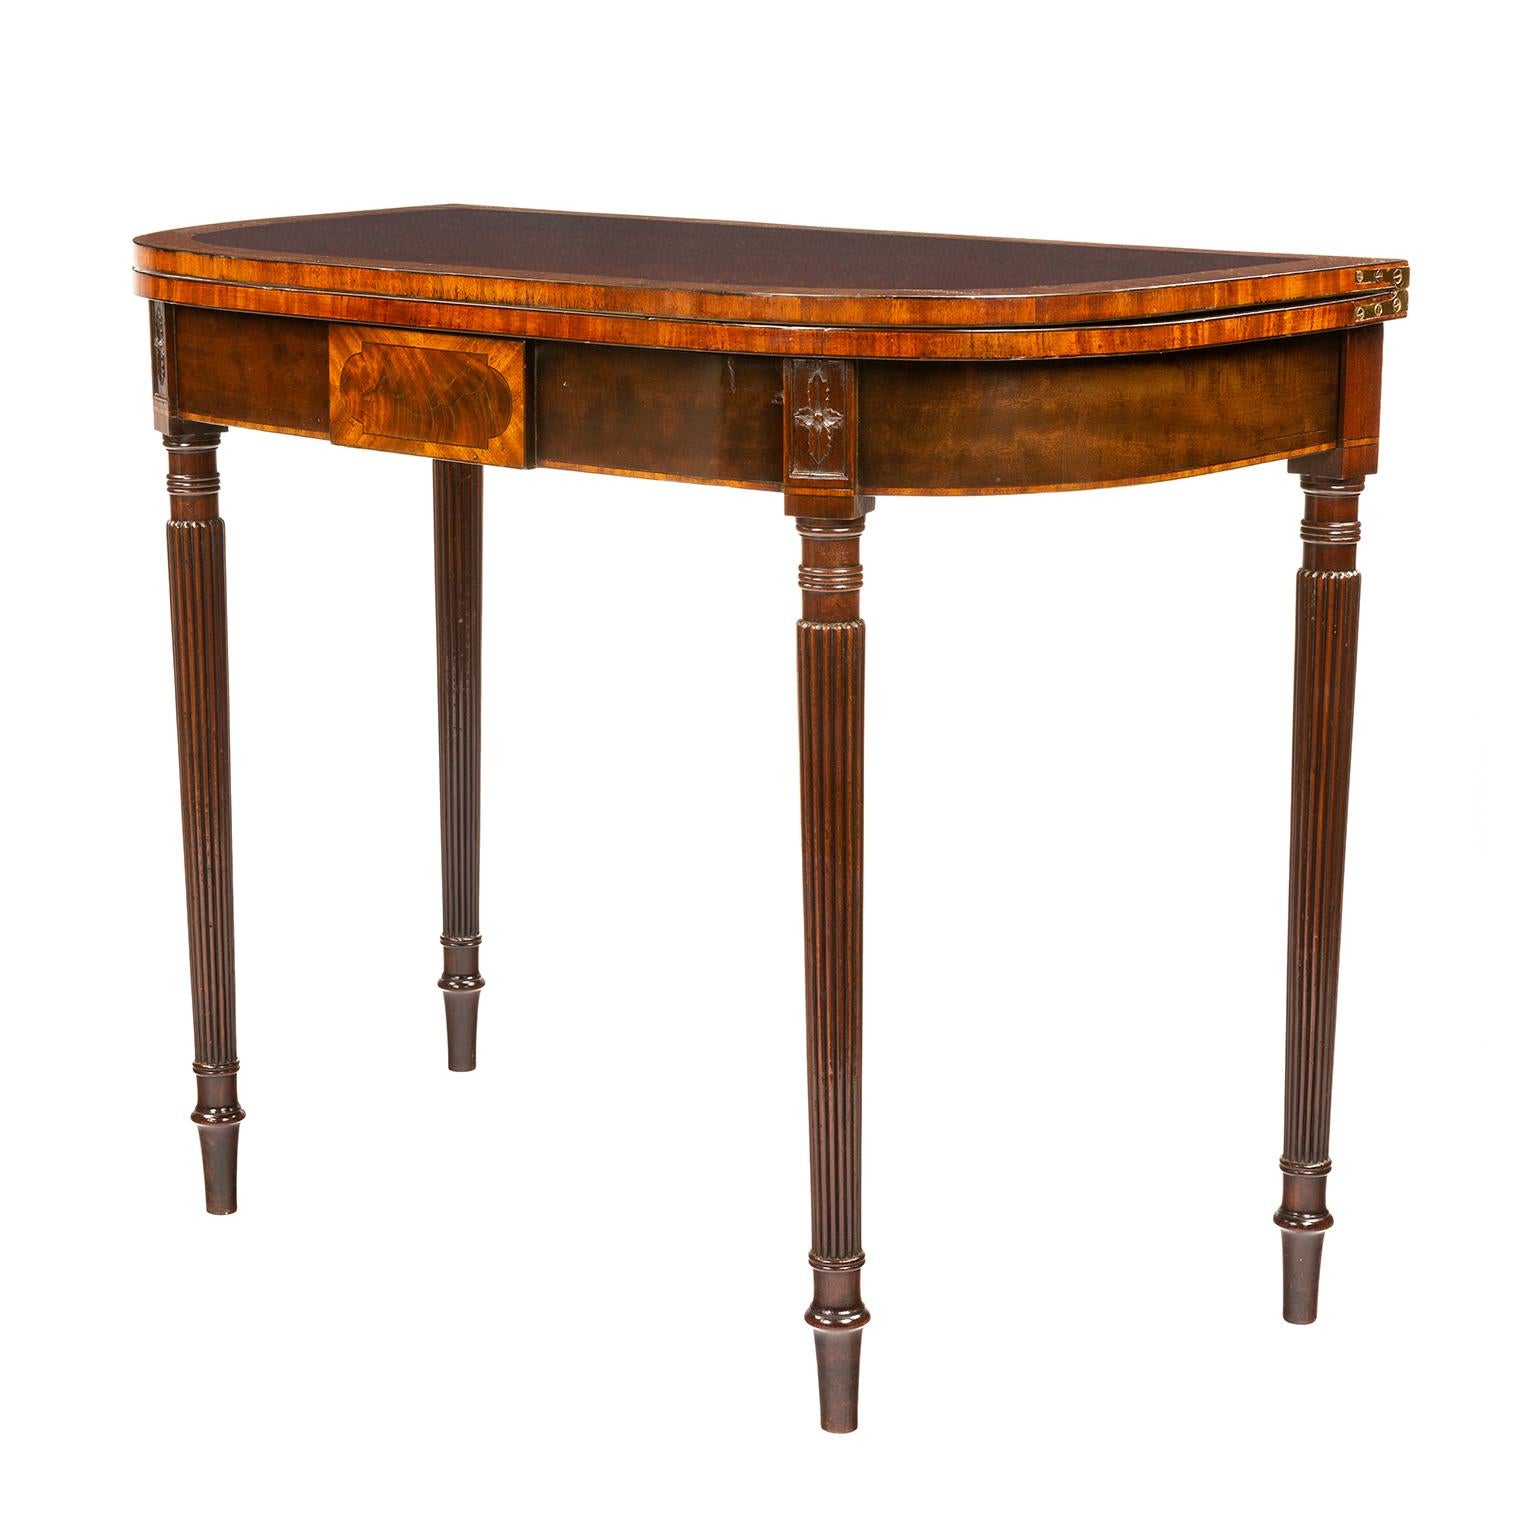 Gillows, Regency, rosewood fold over tea table, crossbanded withsatinwood and boxwood stringing

Gillows of Lancaster and London, also known as Gillow & Co., was an English furniture making firm based in Lancaster, Lancashire, and in London. It